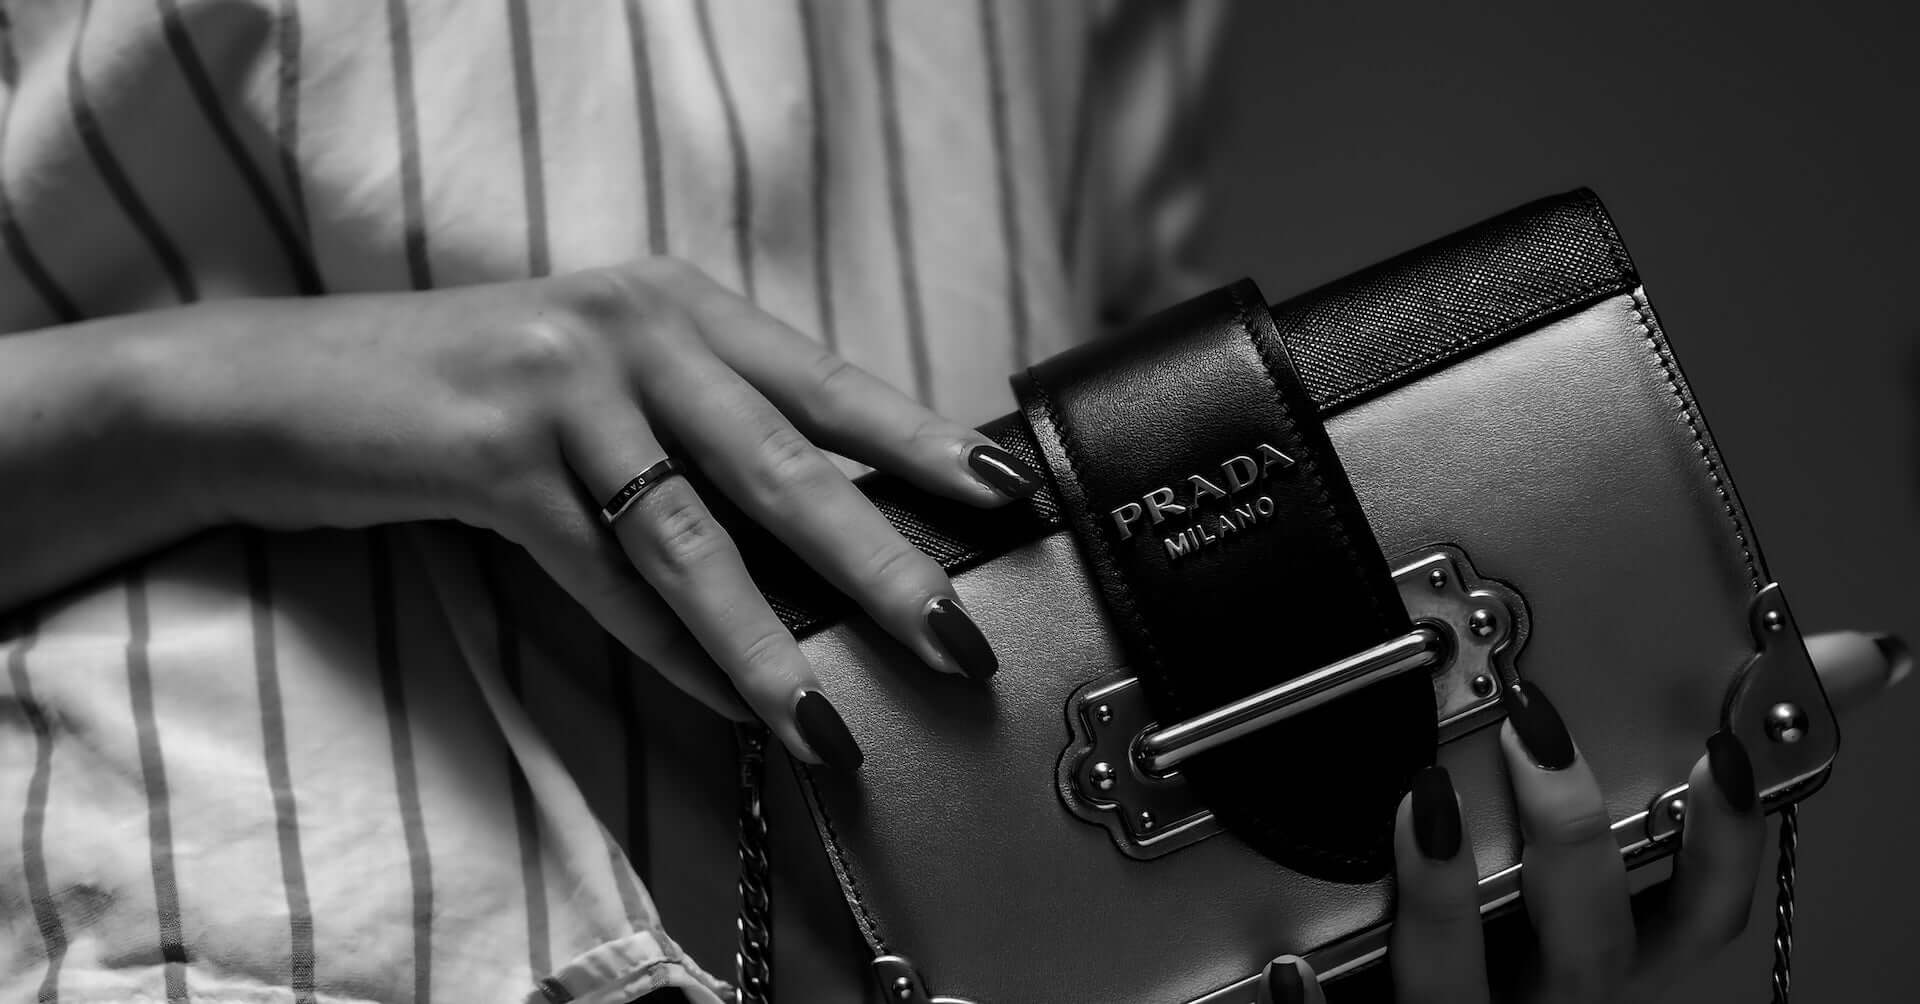 A black and white image of a woman holding a small Prada clutch purse.